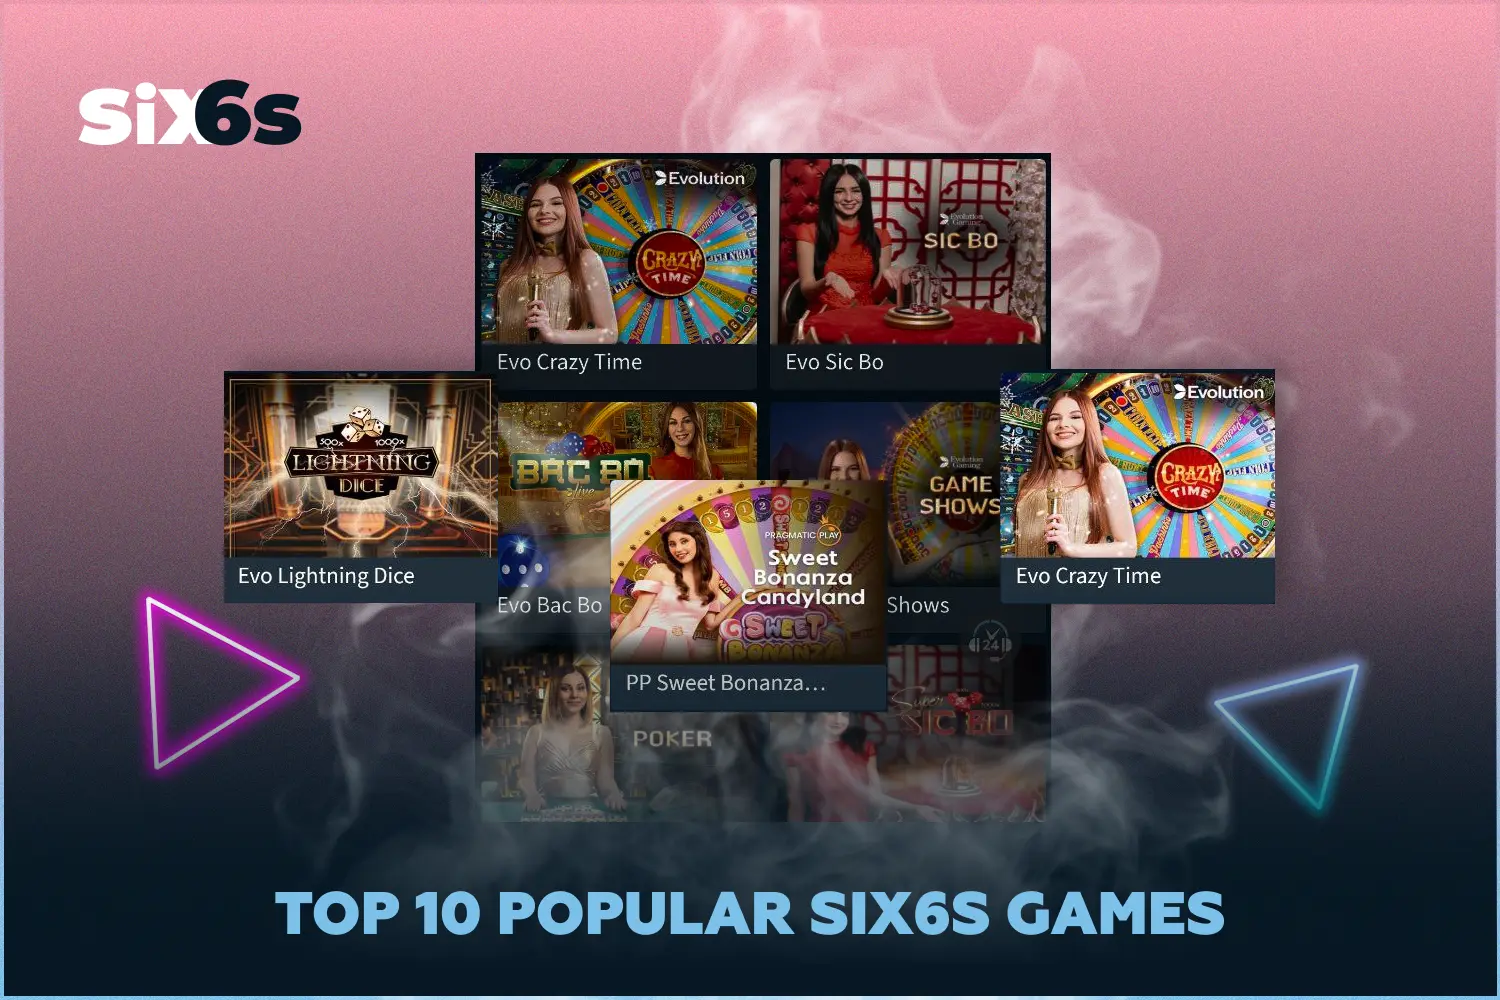 Some Six6s casino games are particularly popular due to their fun and interesting mechanics